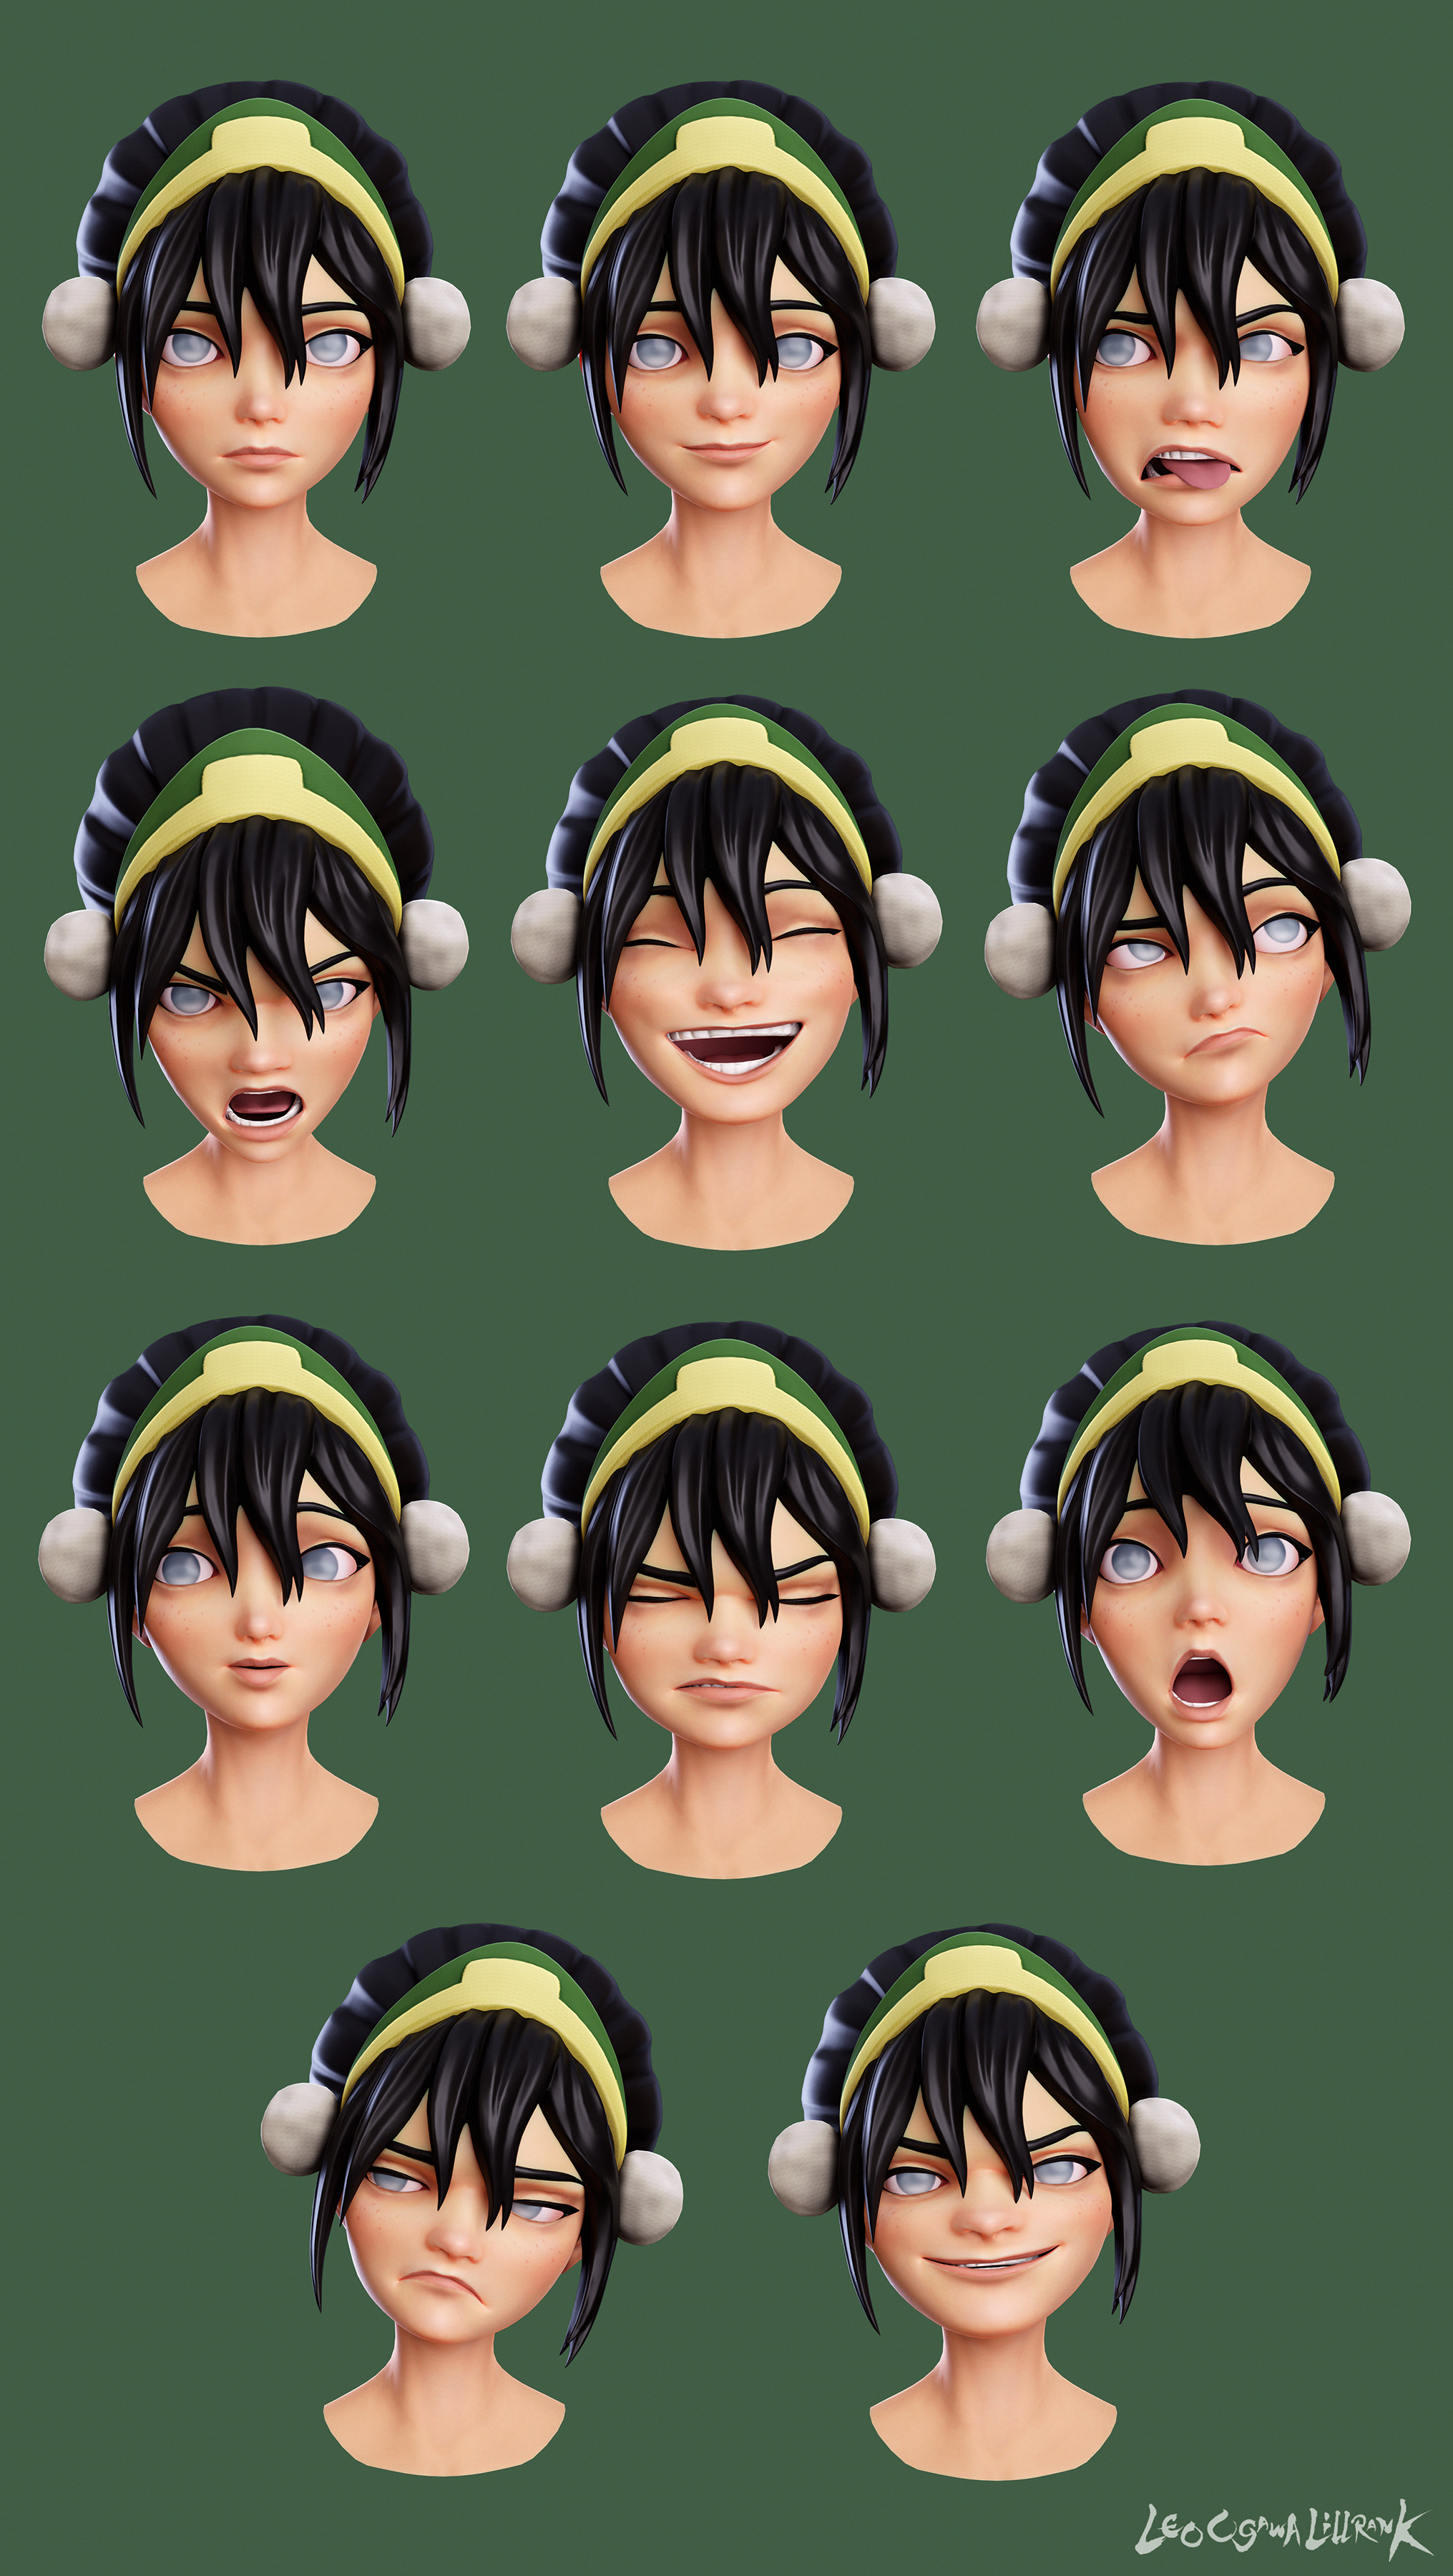 It includes a face rig. Here are some expression examples.